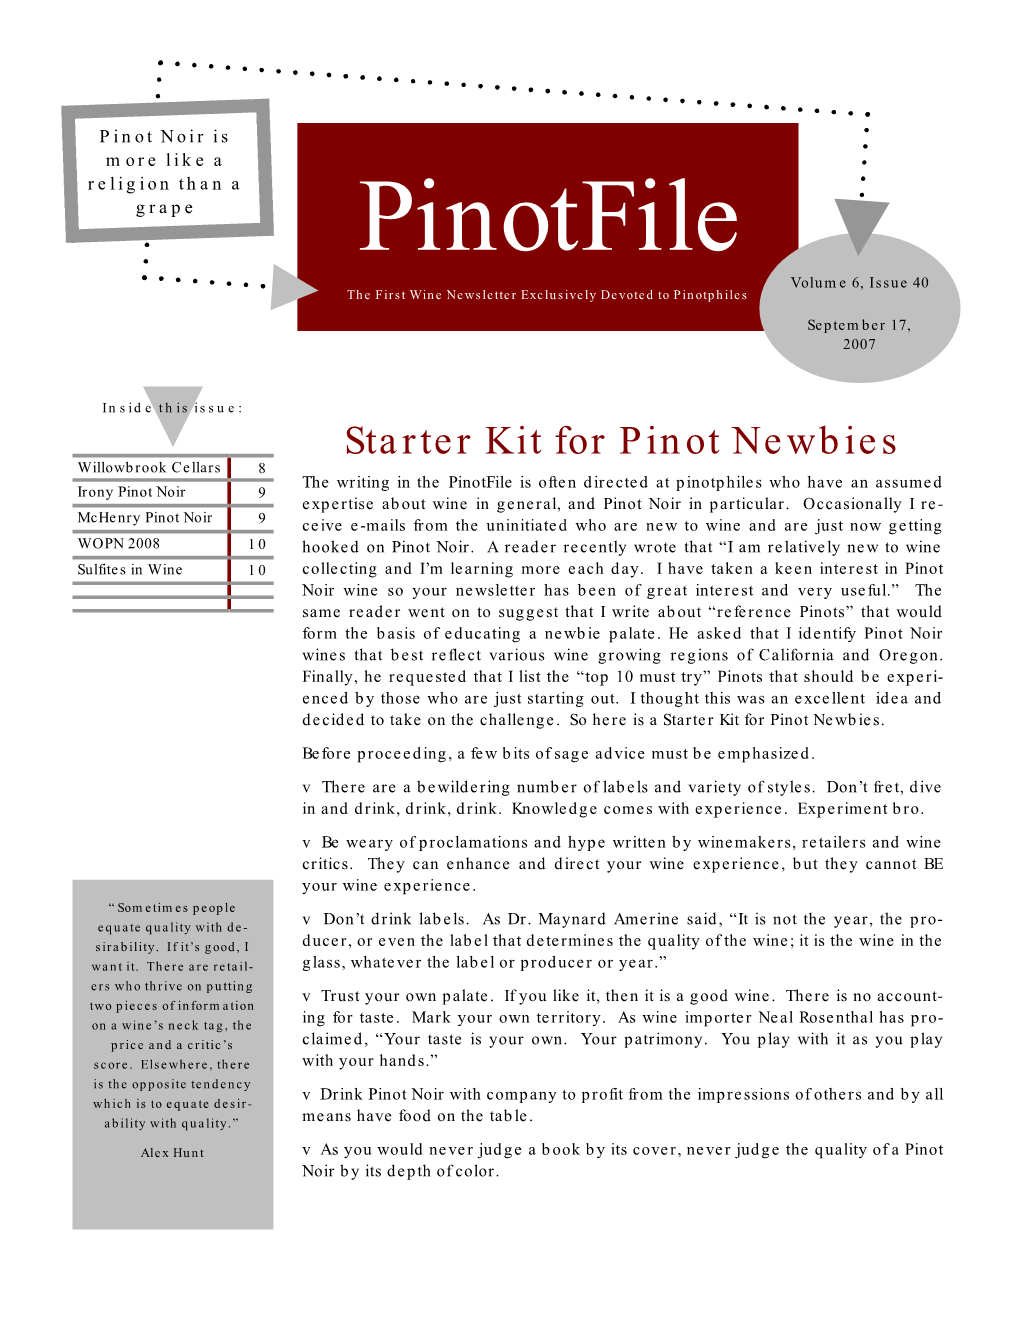 Pinotfile Volume 6, Issue 40 the First Wine Newsletter Exclusively Devoted to Pinotphiles